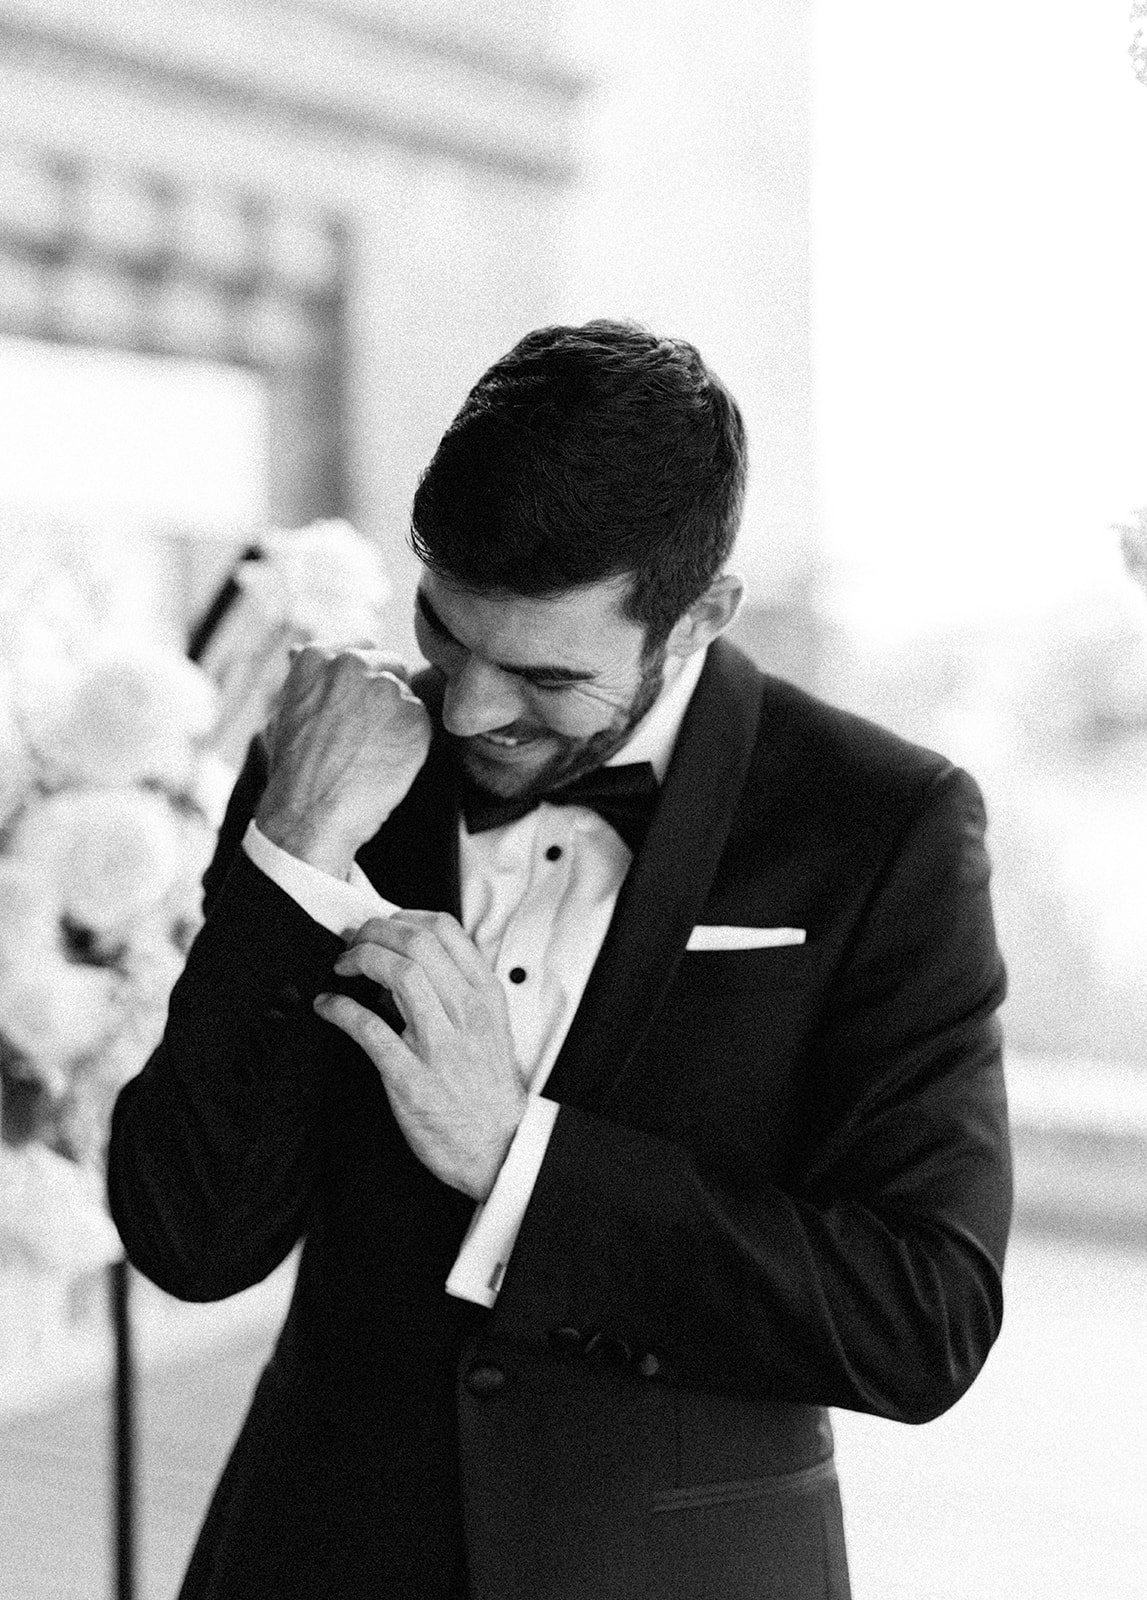 Black and white image of groom fixing cuff link